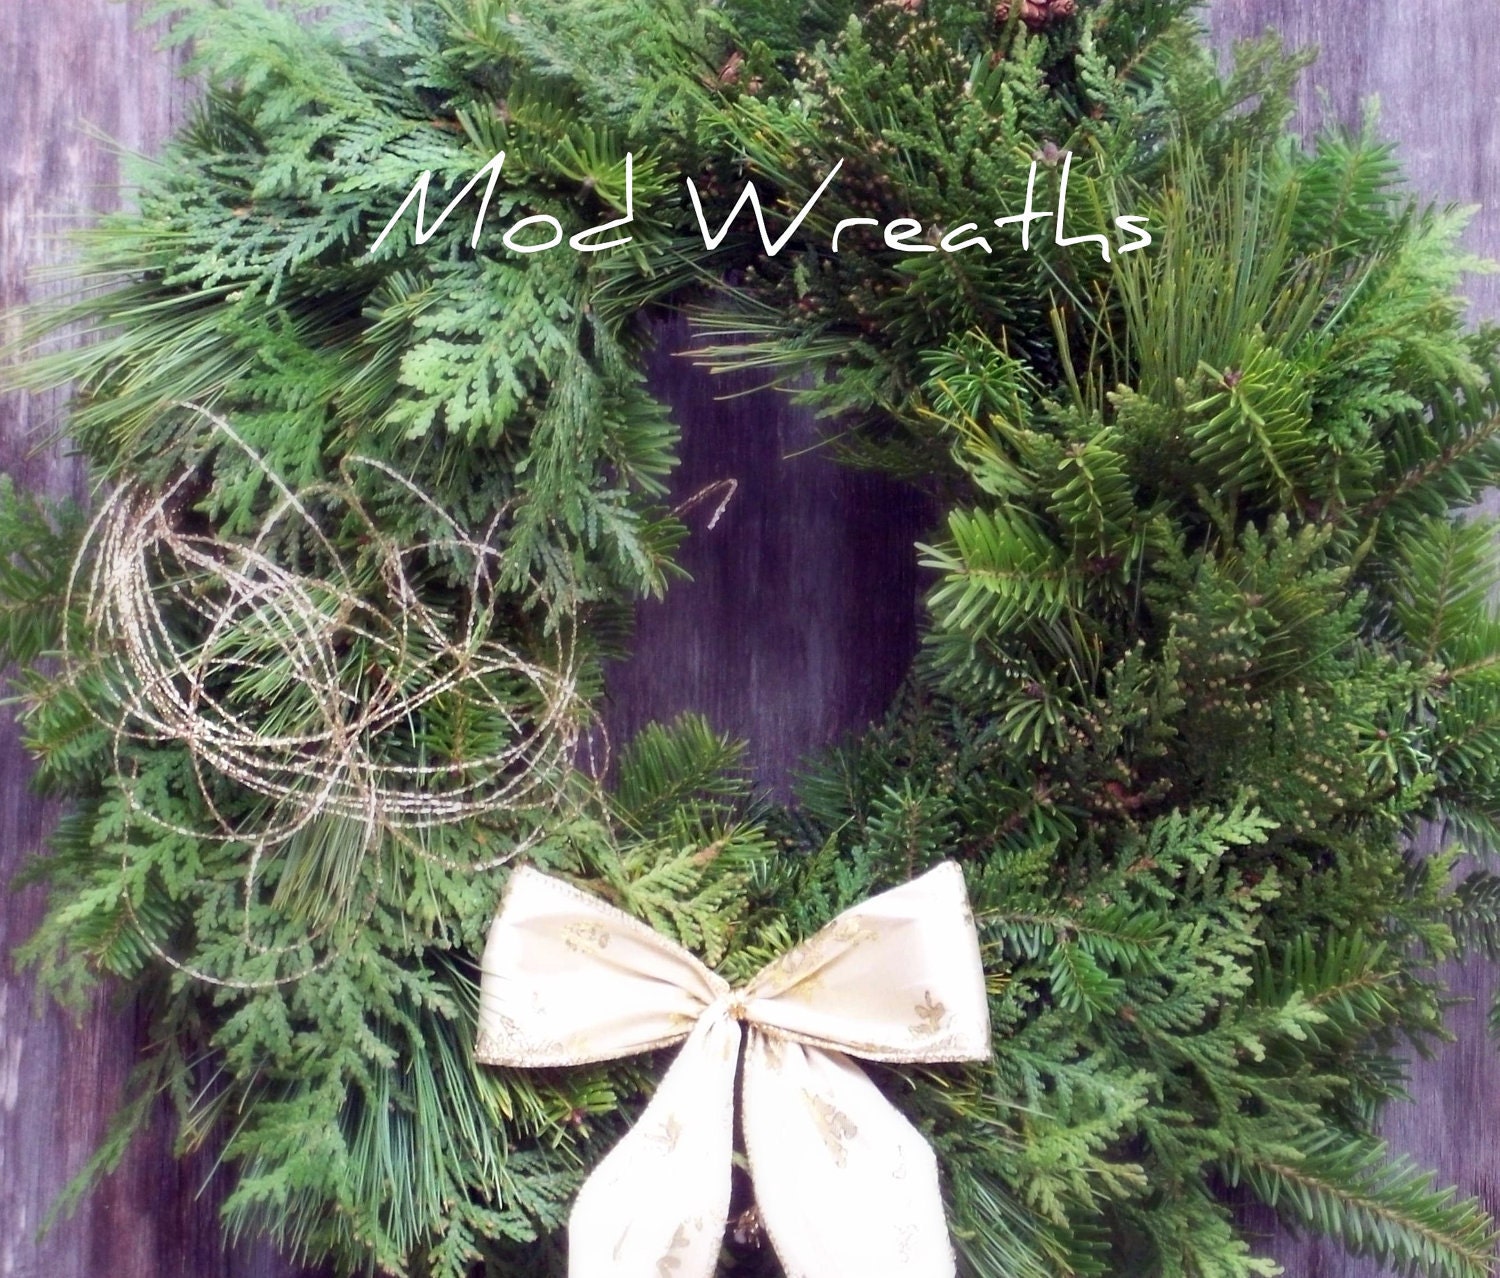 Vintage Mod Wreaths - Attracts Fairies to Your Door. The "Snowdrop" Fairy Wreath - 24" Maine Balsam Twig For Christmas or Any Occassion. - ModWreaths